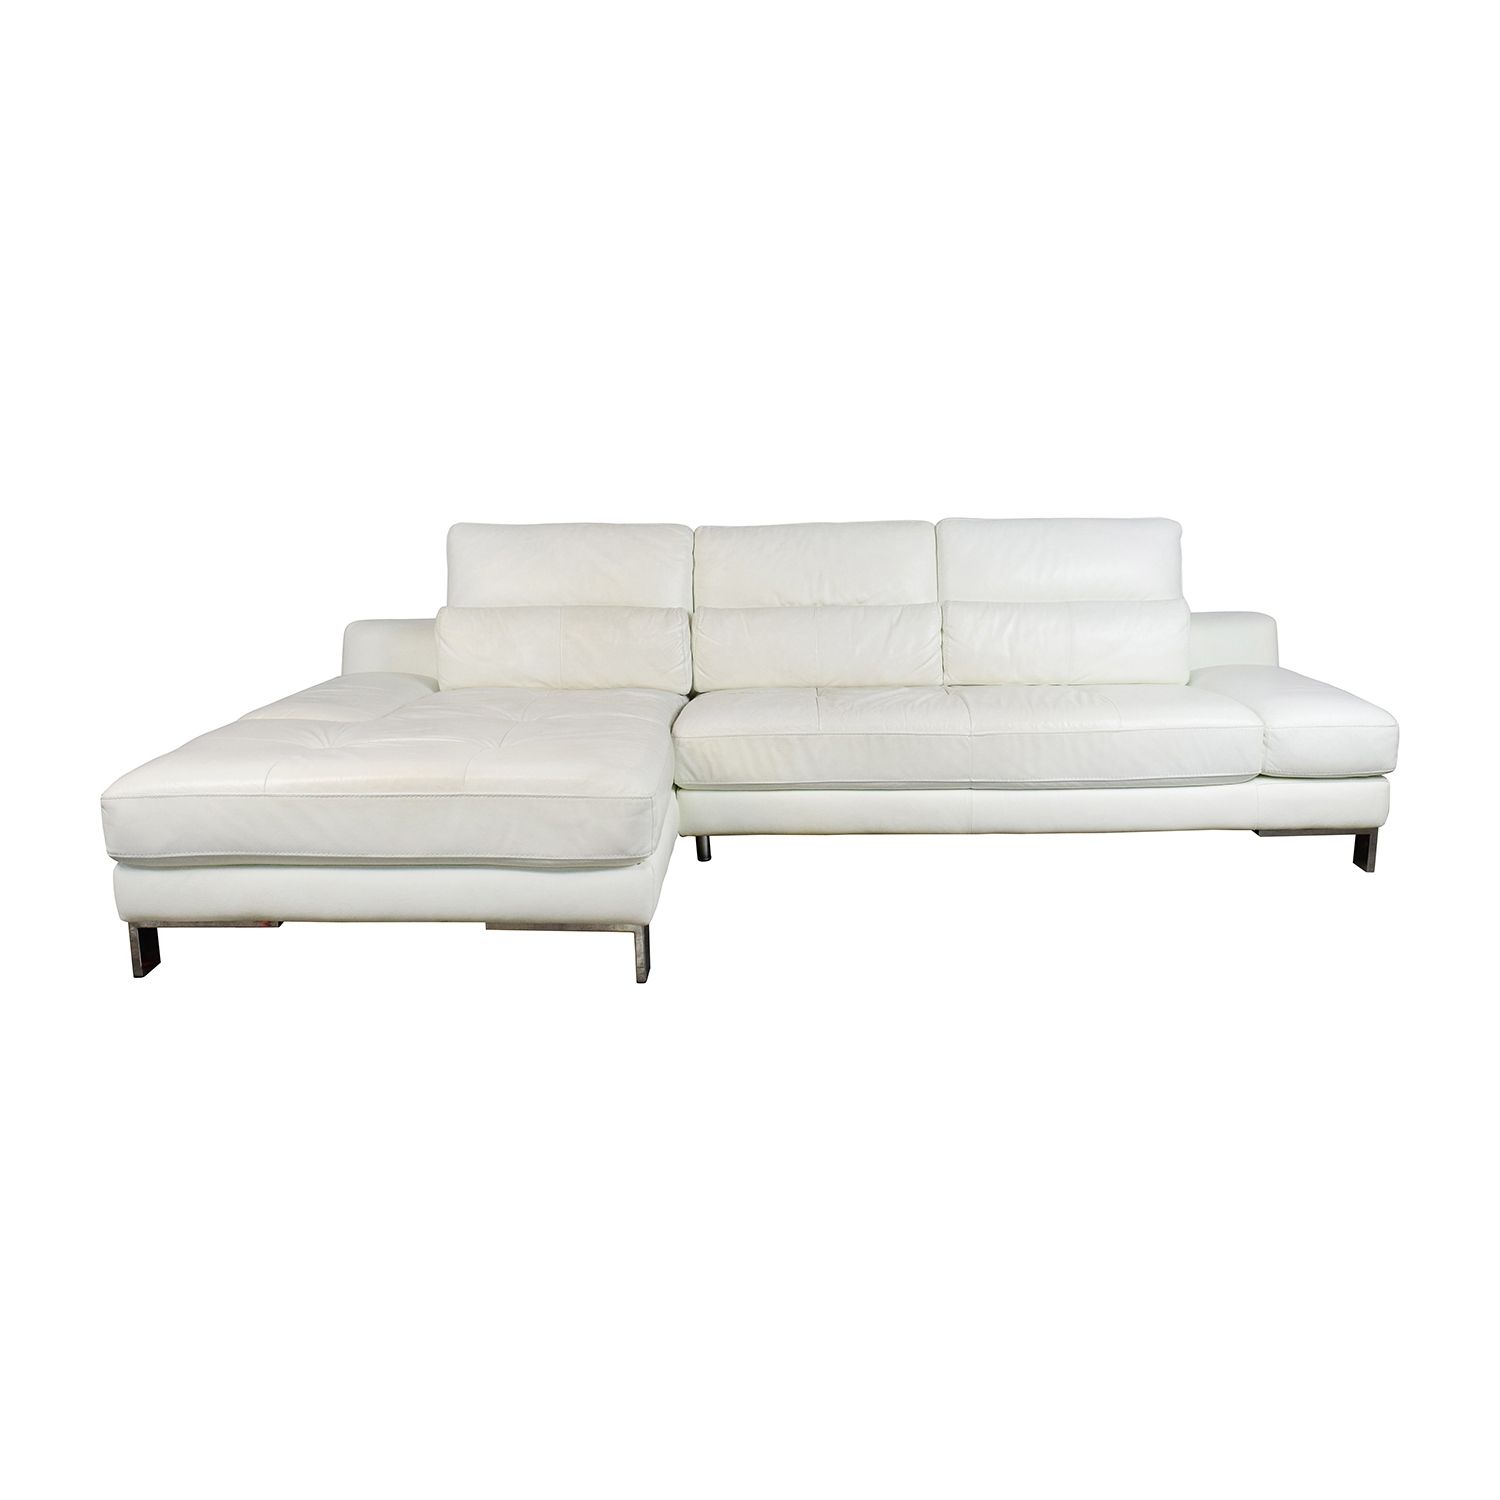 [%72% Off – Mobilia Canada Mobilia Canada Funktion White Leather Within Well Liked Mobilia Sectional Sofas|Mobilia Sectional Sofas Inside Favorite 72% Off – Mobilia Canada Mobilia Canada Funktion White Leather|Widely Used Mobilia Sectional Sofas Within 72% Off – Mobilia Canada Mobilia Canada Funktion White Leather|Famous 72% Off – Mobilia Canada Mobilia Canada Funktion White Leather Inside Mobilia Sectional Sofas%] (View 1 of 15)